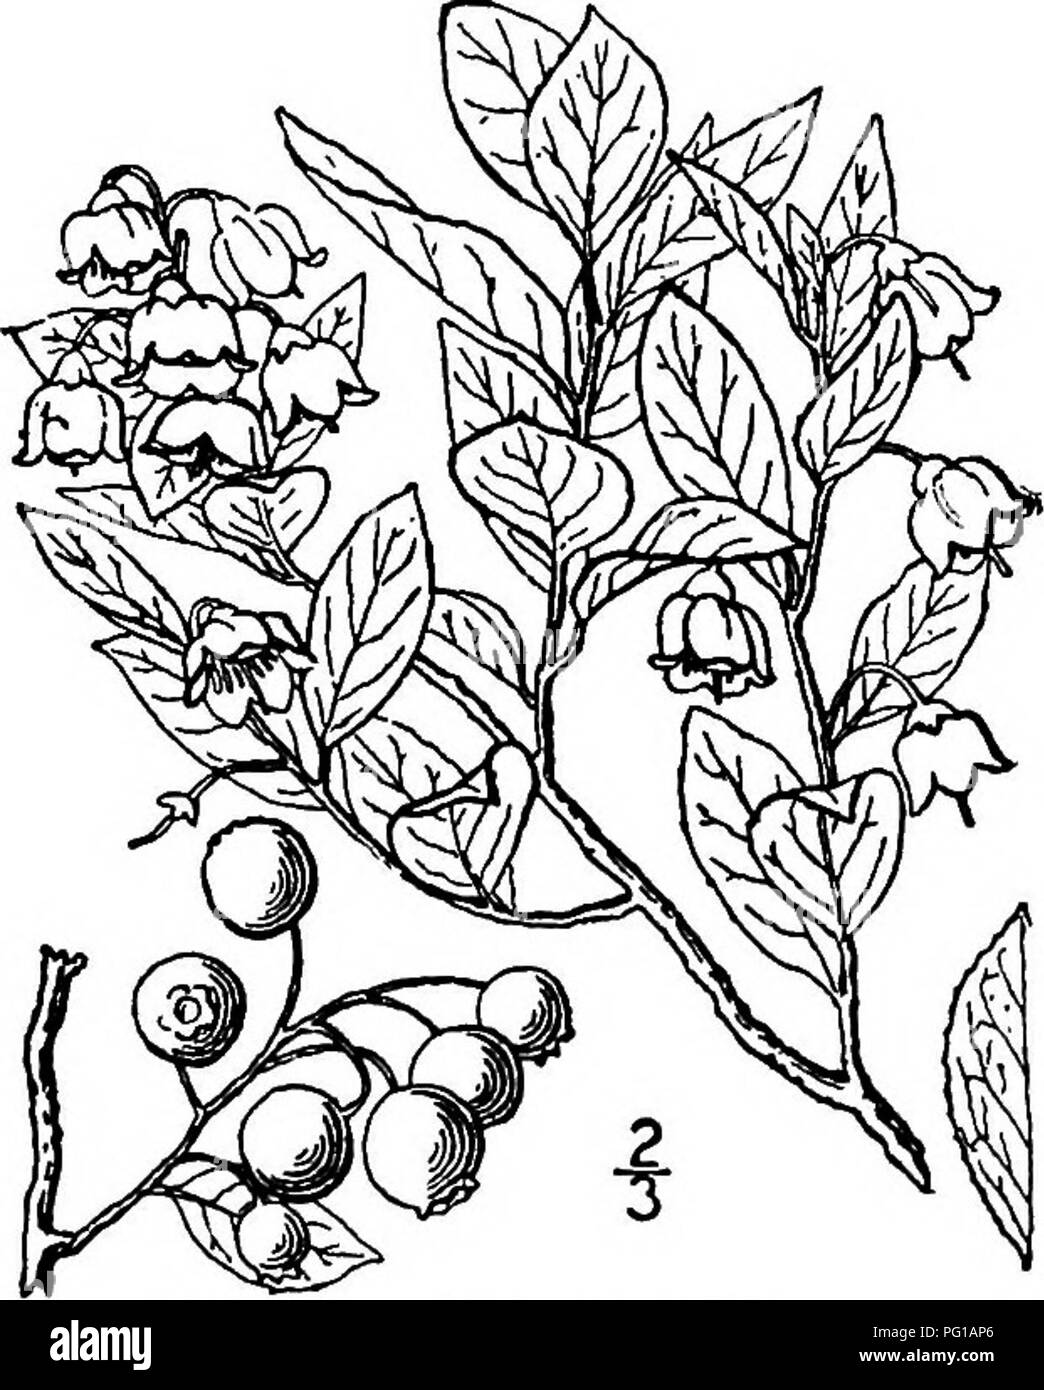 Blue Berries. Vector Color Sketch Of Food. Blueberries, Huckleberry,  Honeysuckle Royalty Free SVG, Cliparts, Vectors, And Stock Illustration.  Image 165543245.